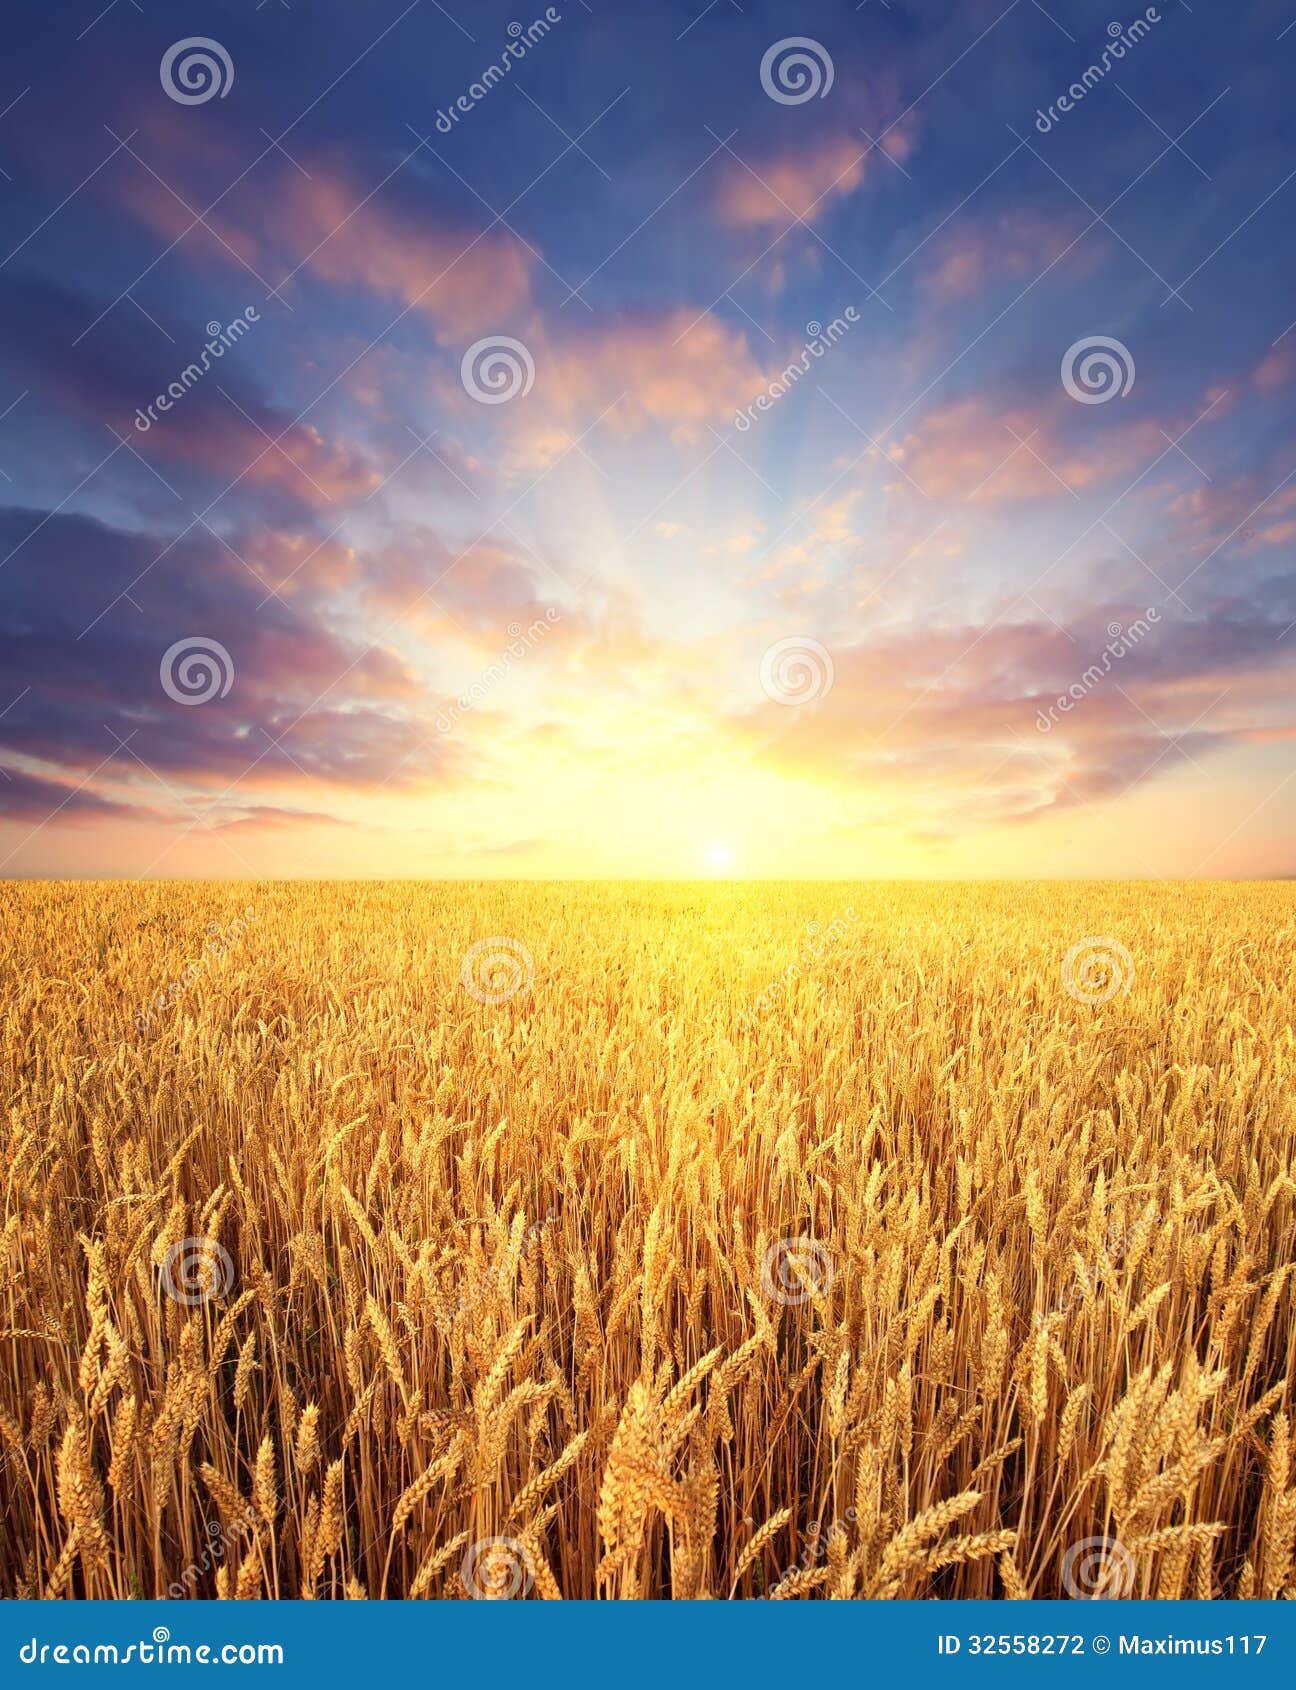 wheat field and sunrise sky as background